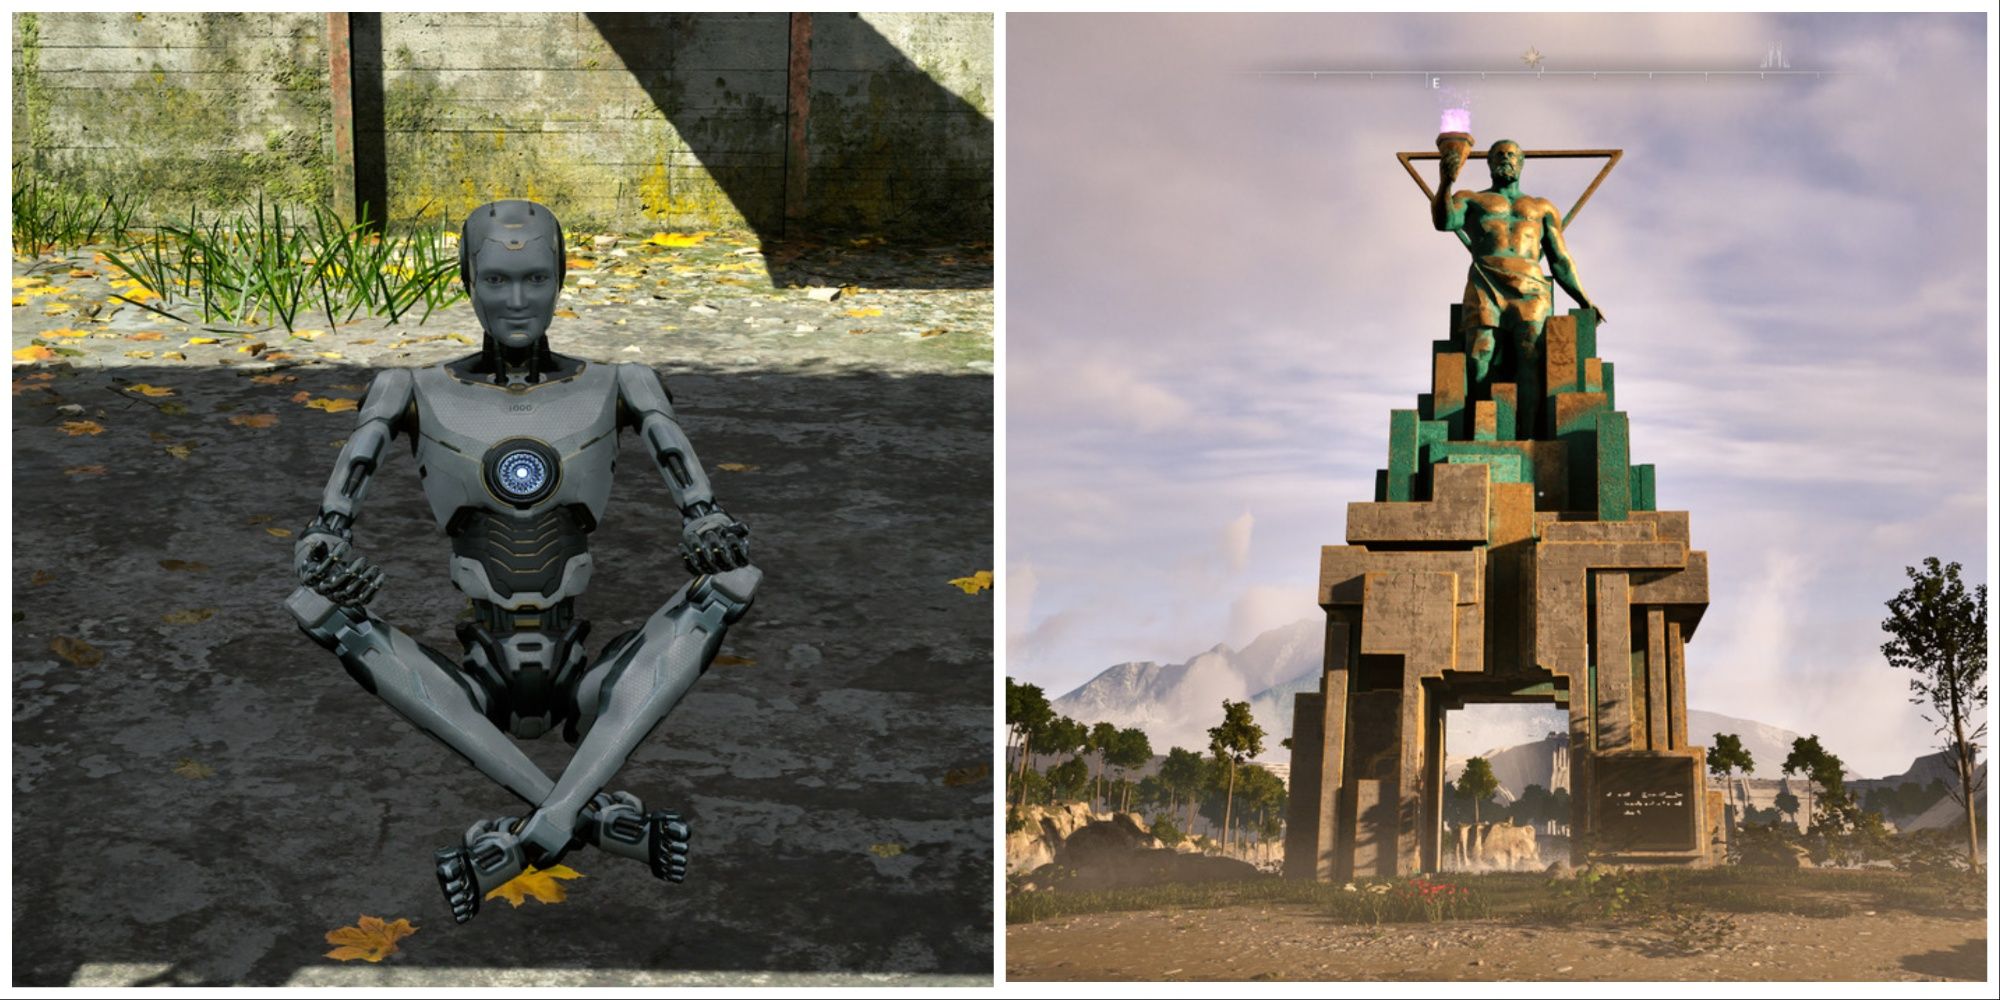 (Left) 1K meditating (Right) Statue holding a lit torch